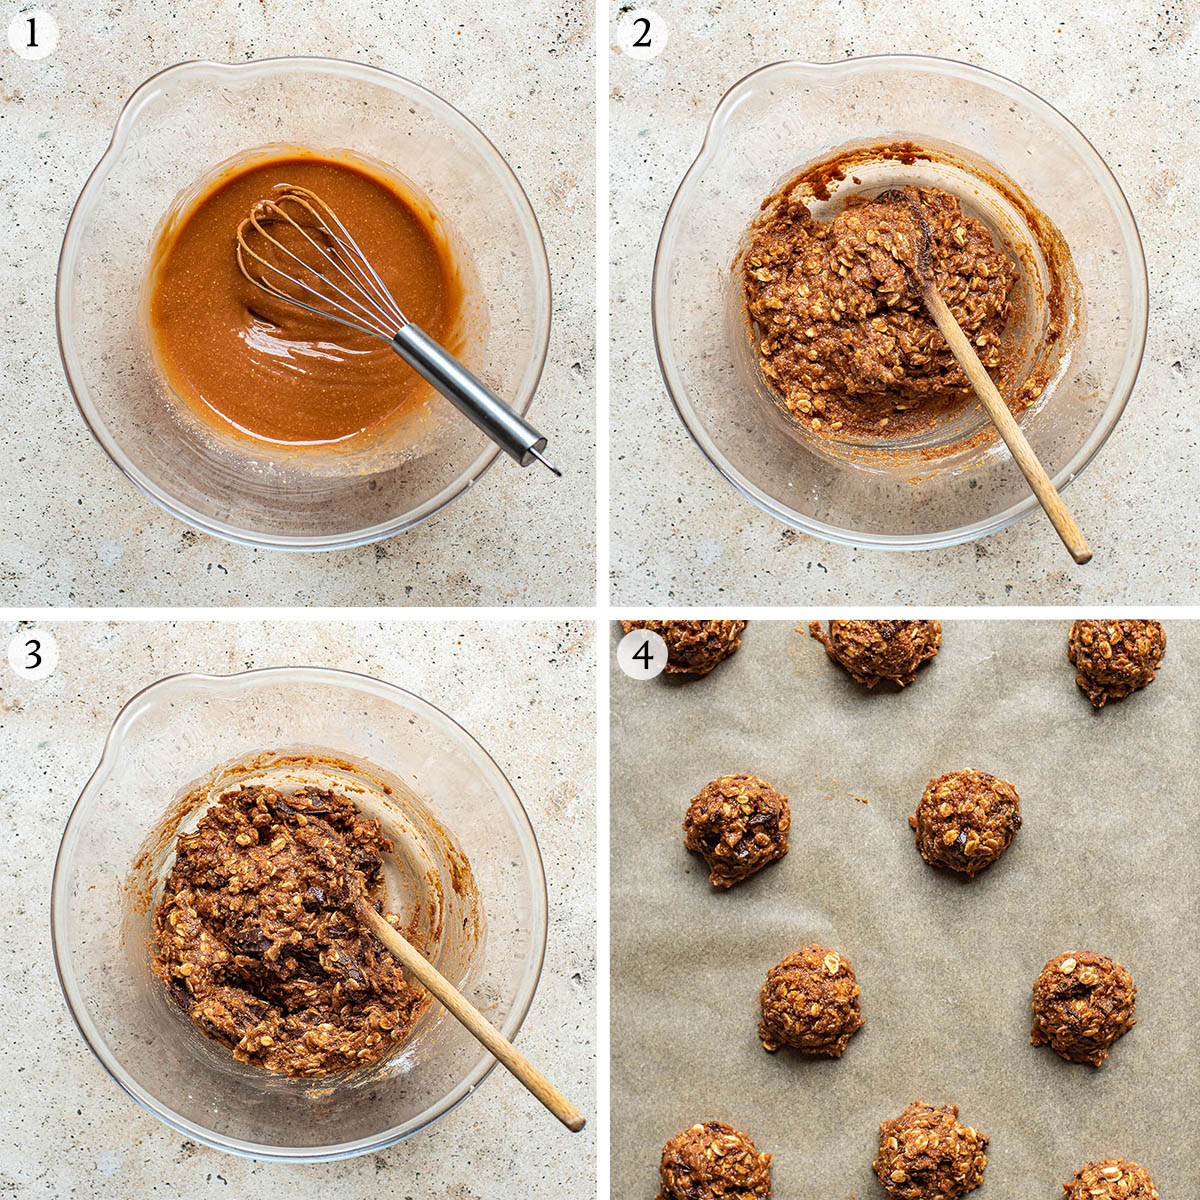 Oatmeal cookies steps 1 to 4.